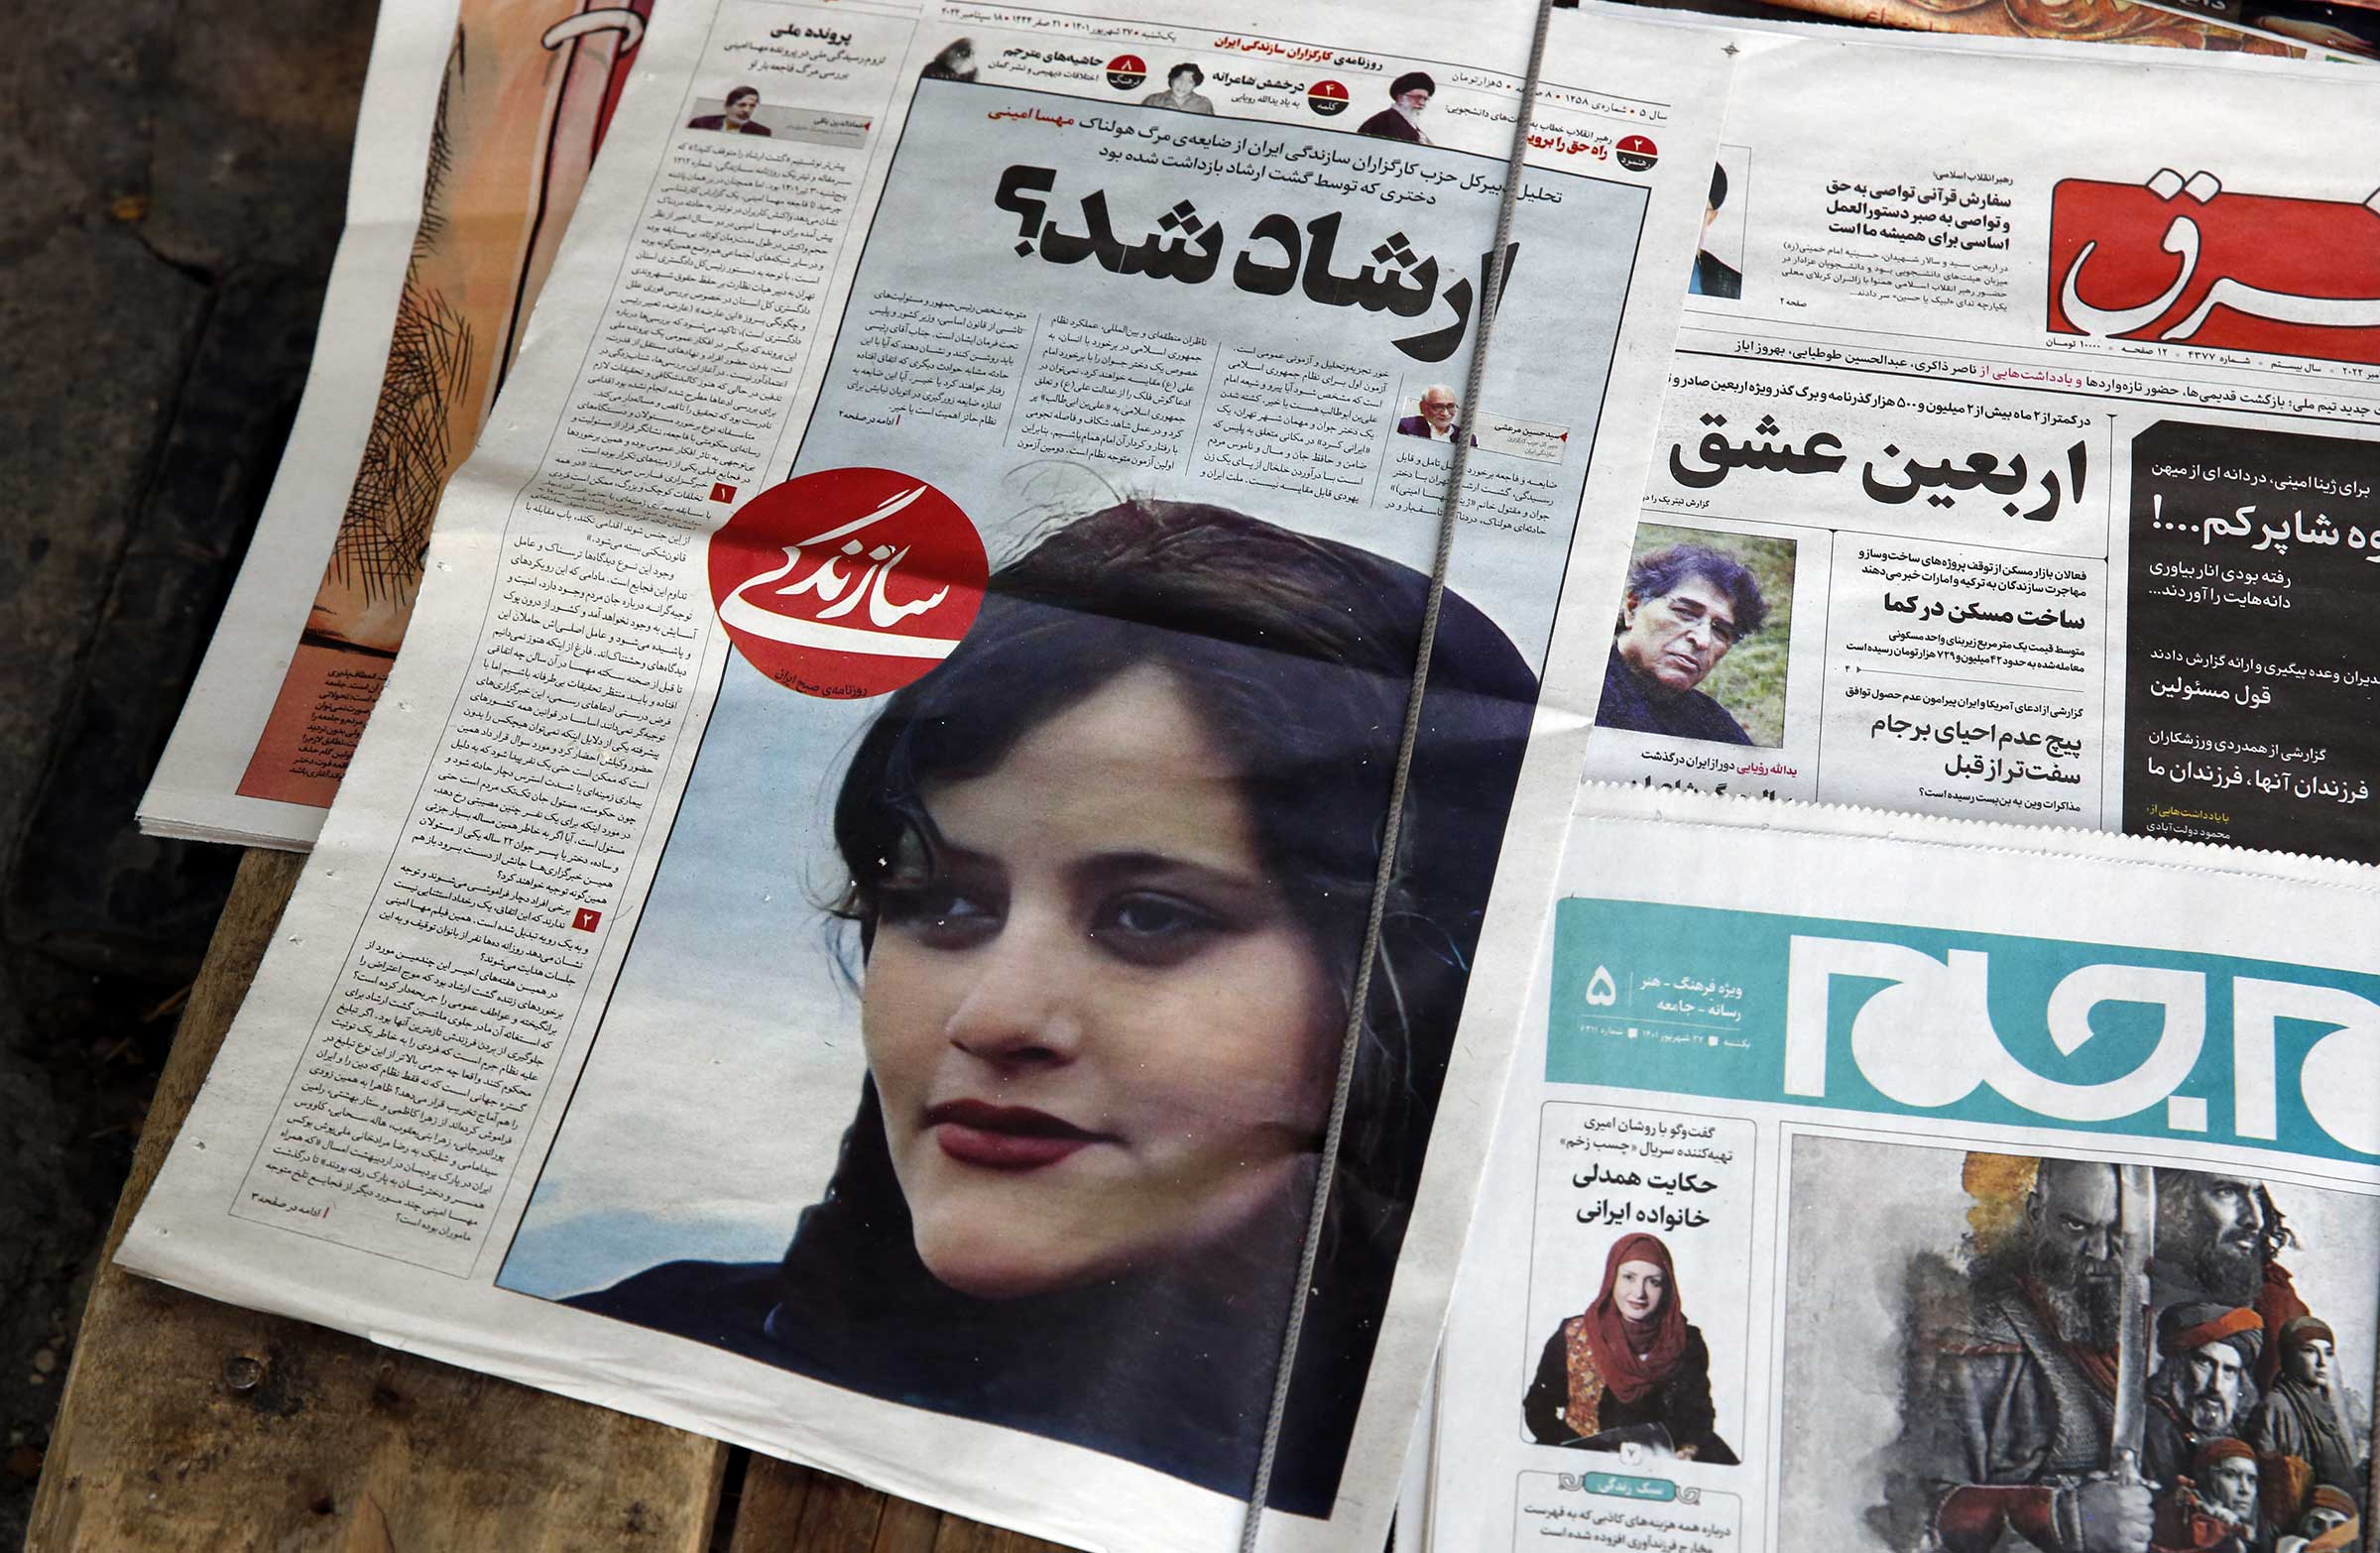 Iranian newspapers report on the death of Mahsa Amini, a woman who died in custody after being detained by a police unit in charge of enforcing  mandatory hijab rules in Tehran, Sept. 18, 2022. (Bedin Taherkenareh—EPA-EPE/Shutterstock)